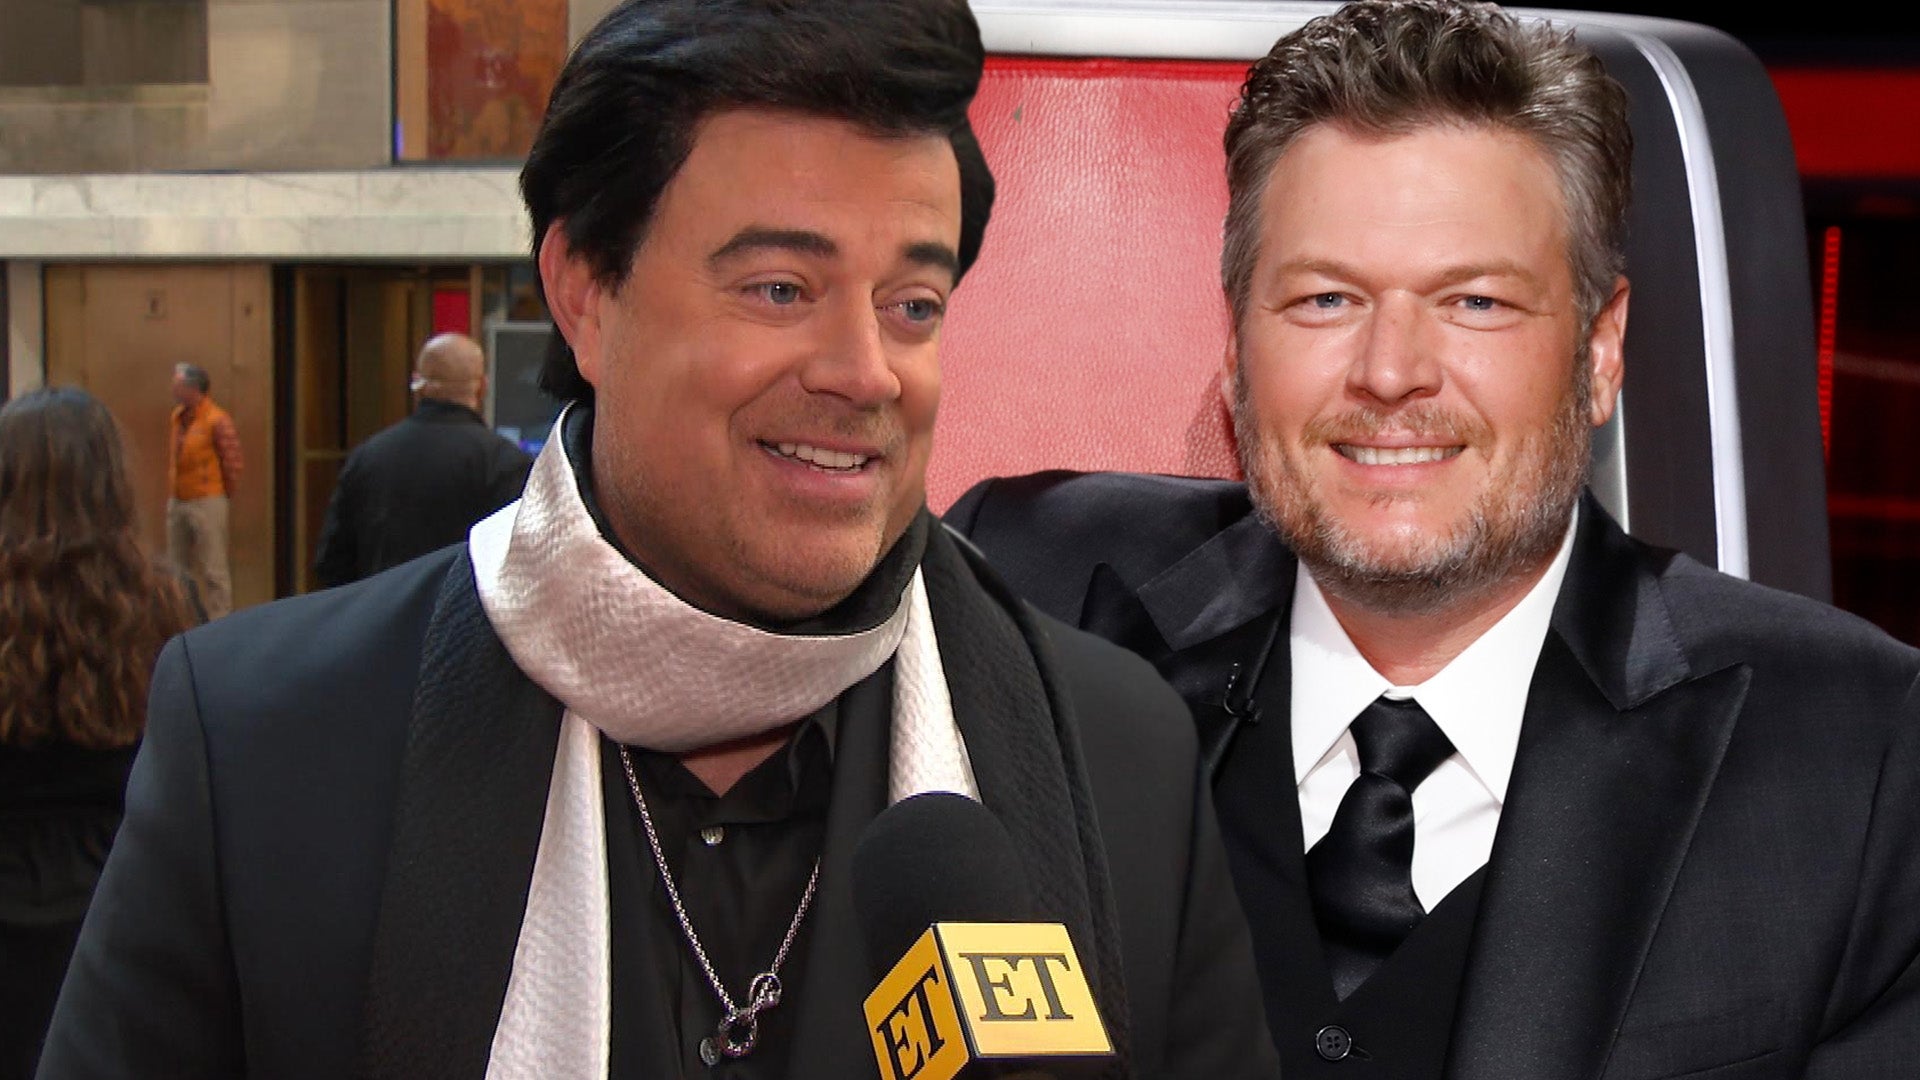 Carson Daly 'So Bummed' Blake Shelton Is Leaving 'The Voice' (Exclusive)